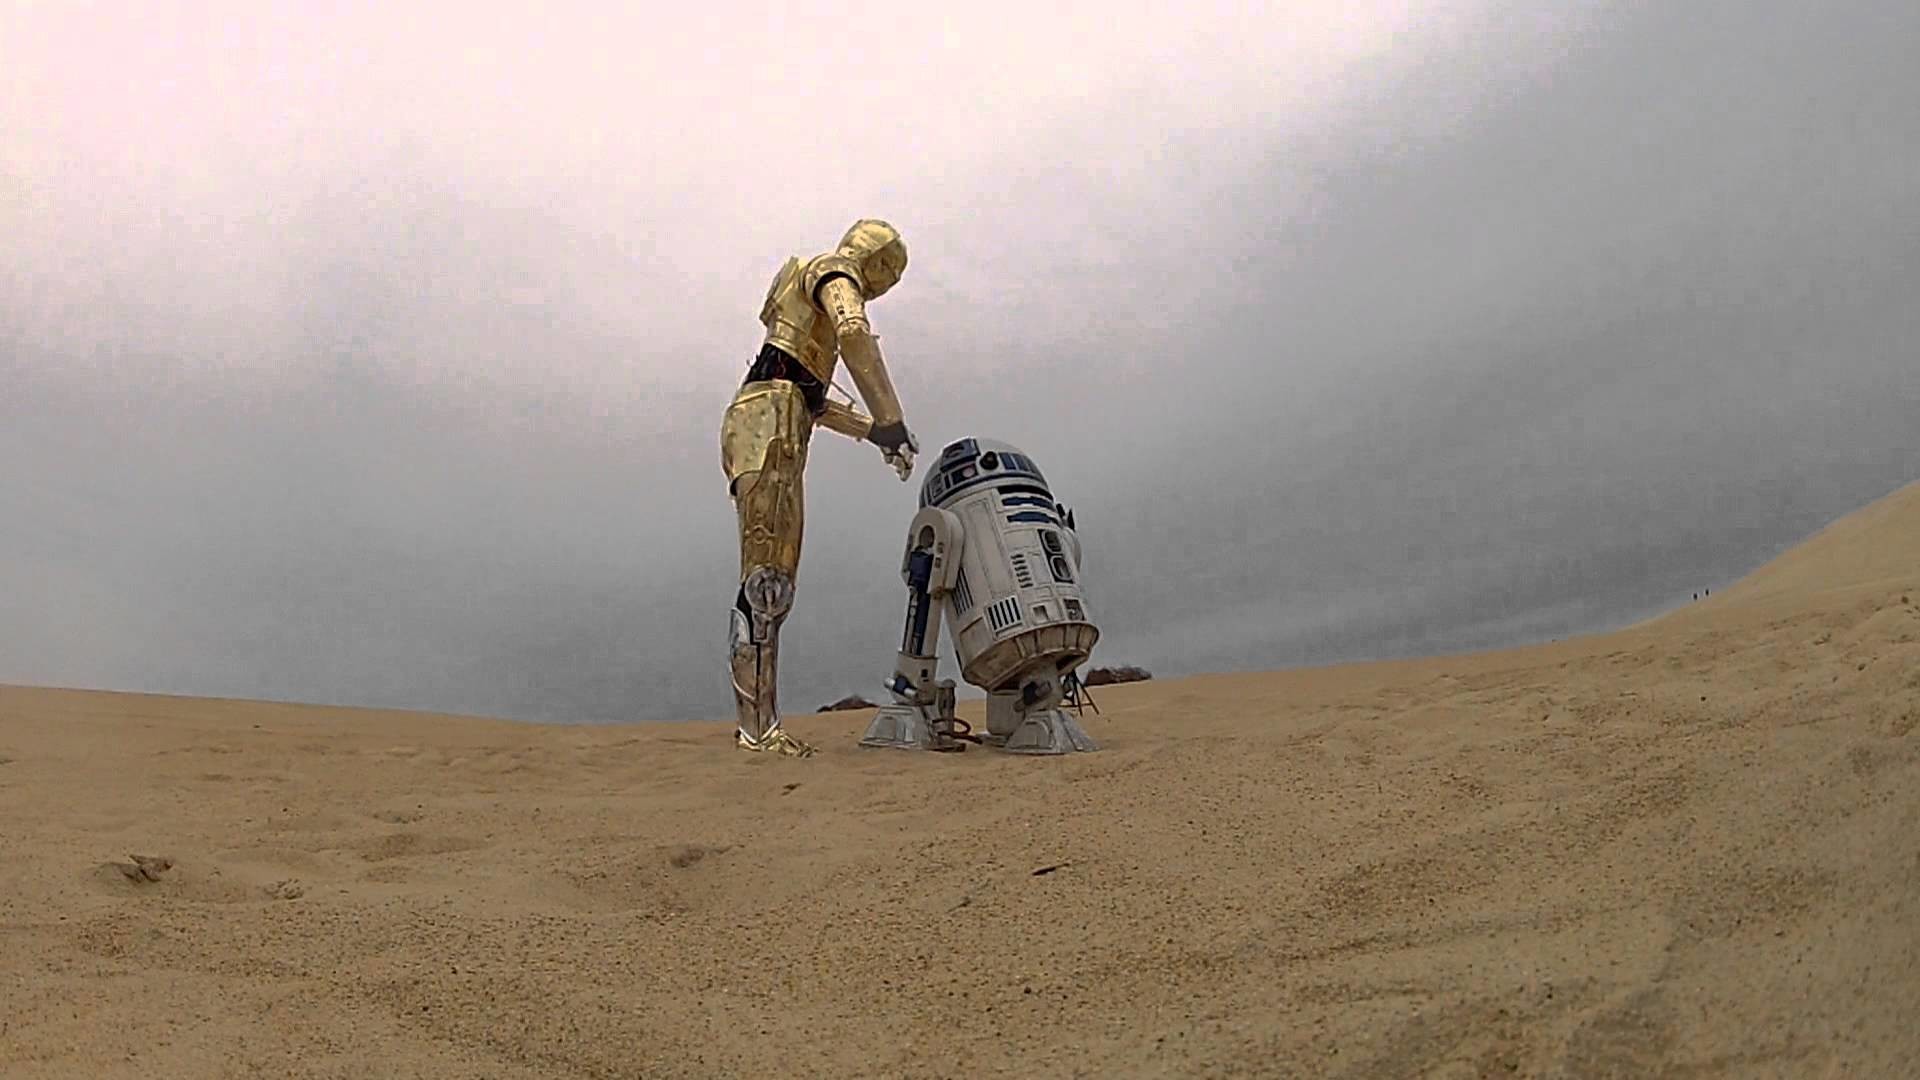 1920x1080 C3PO and R2D2 chillen in the desert - YouTube